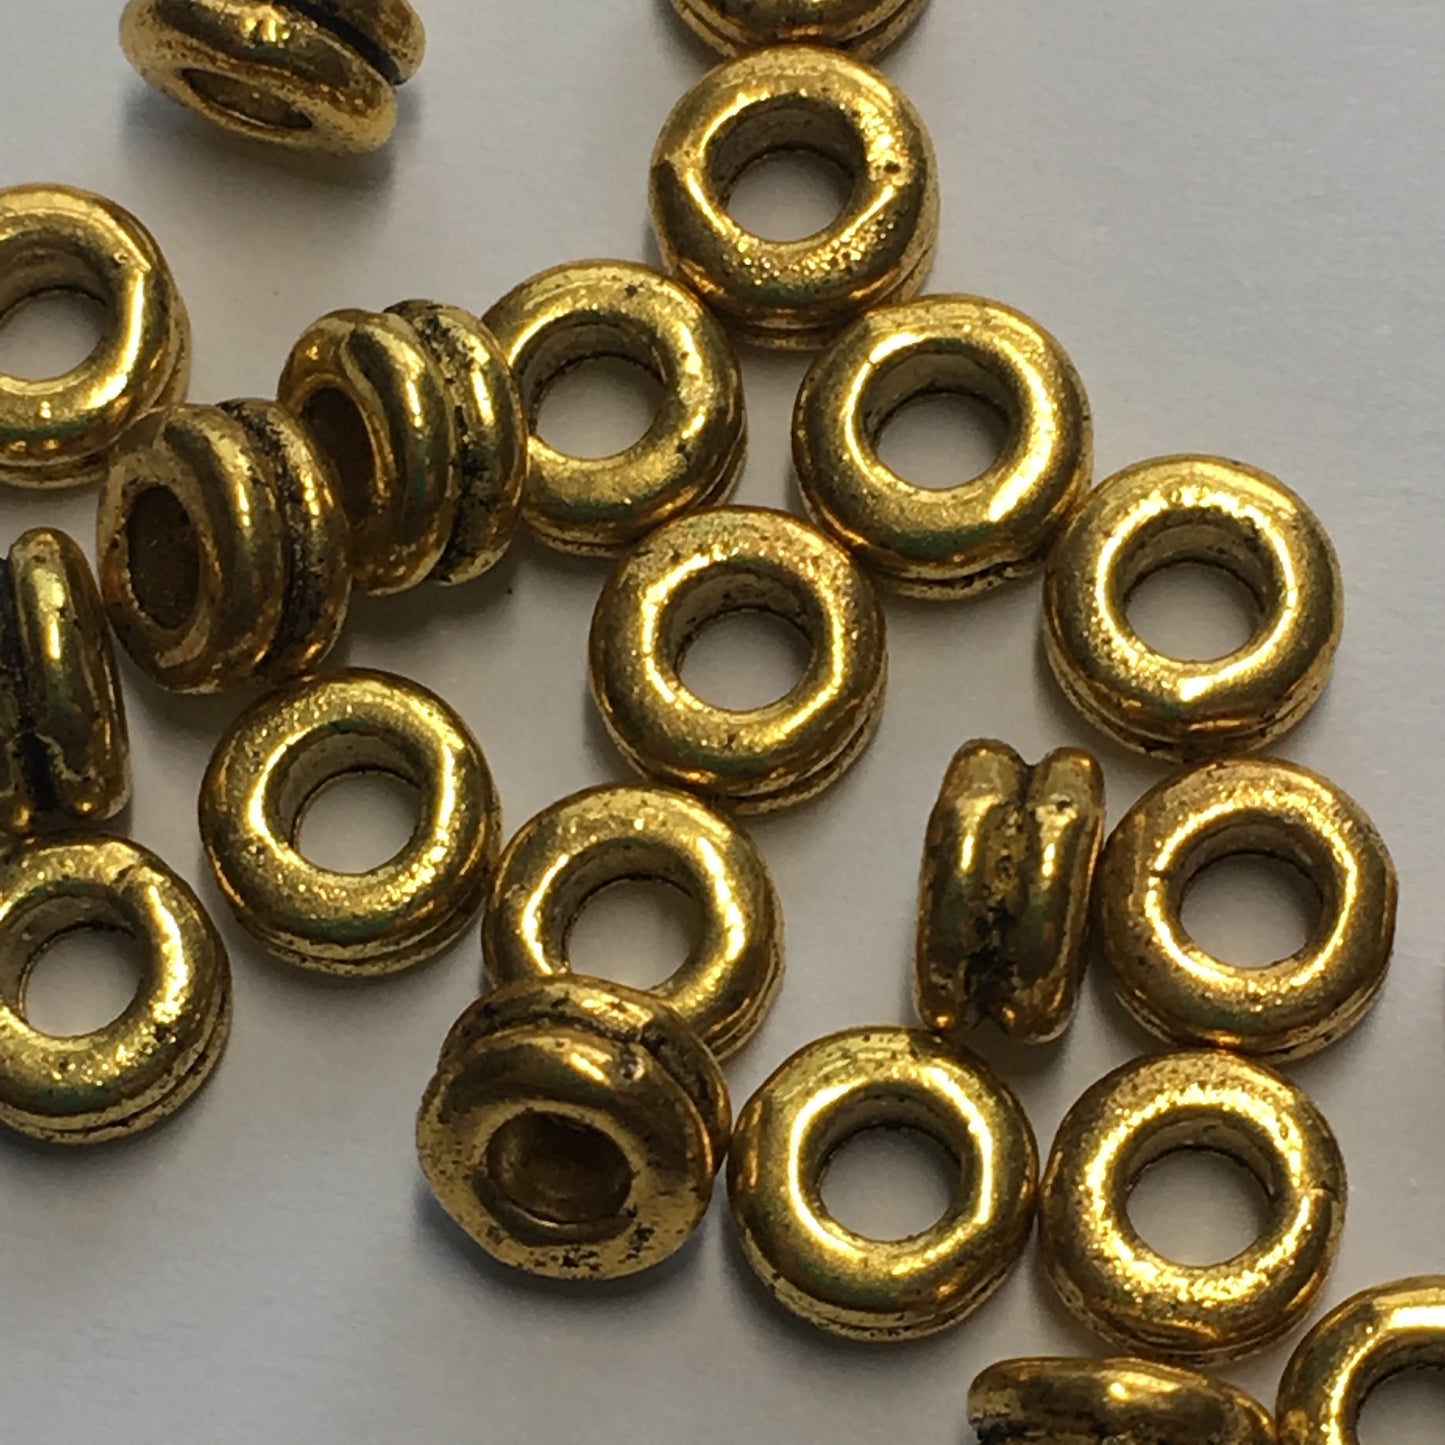 Gold Double Ring Spacer Beads, 6 x 3 mm - 22 Spacers